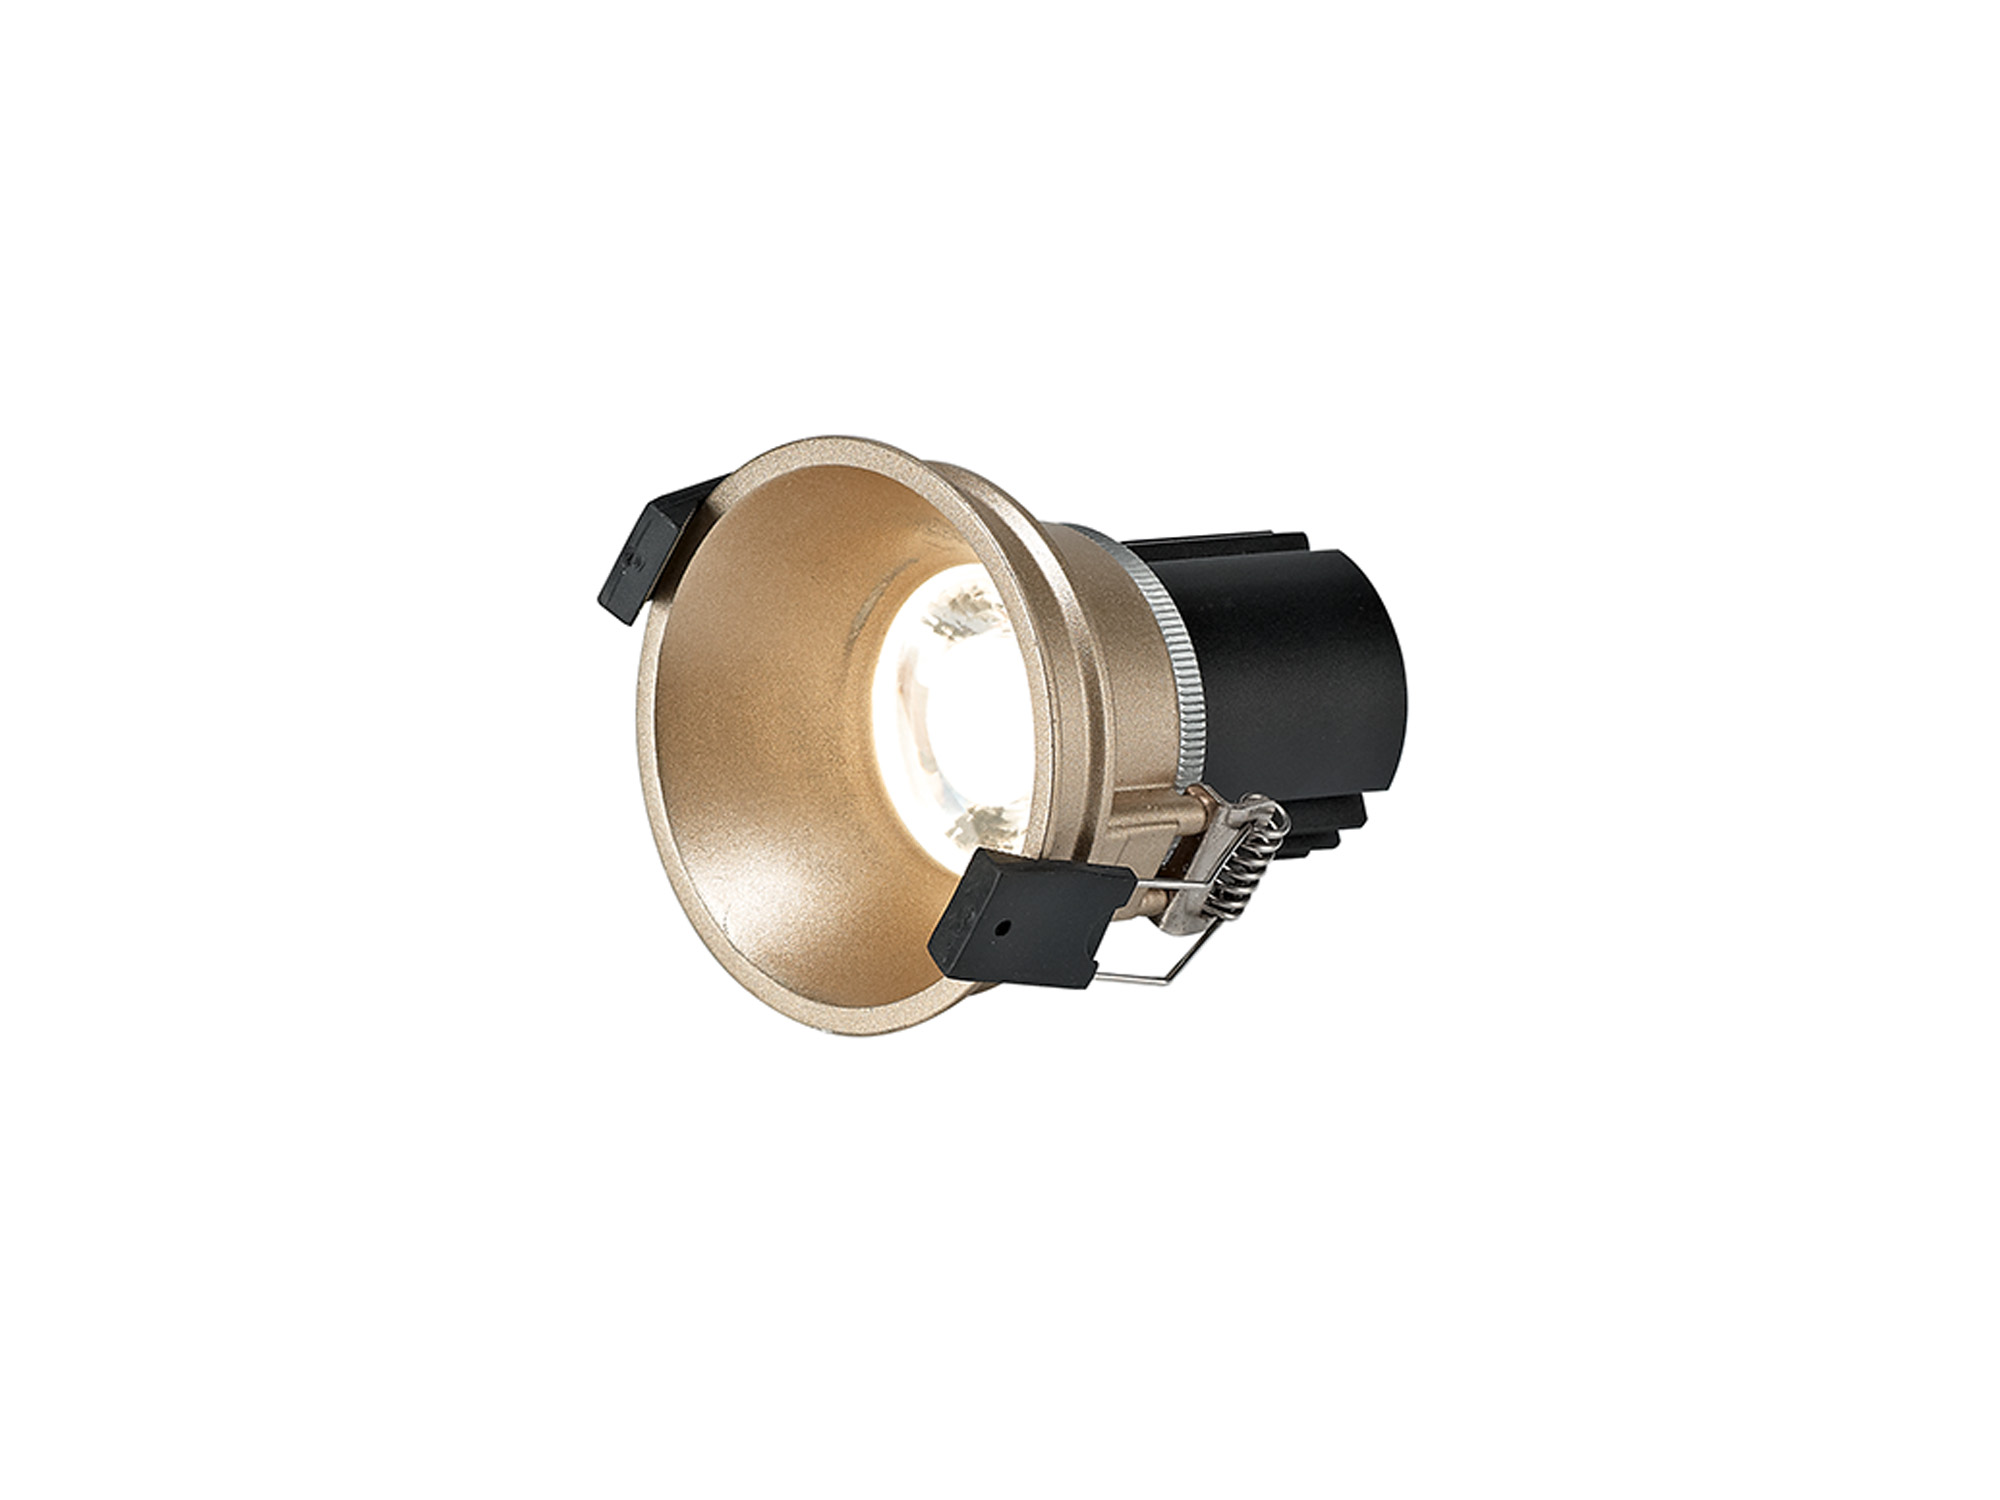 DM201652  Bania 9 Powered by Tridonic  9W 2700K 770lm 24° CRI>90 LED Engine; 250mA Gold Fixed Recessed Spotlight; IP20